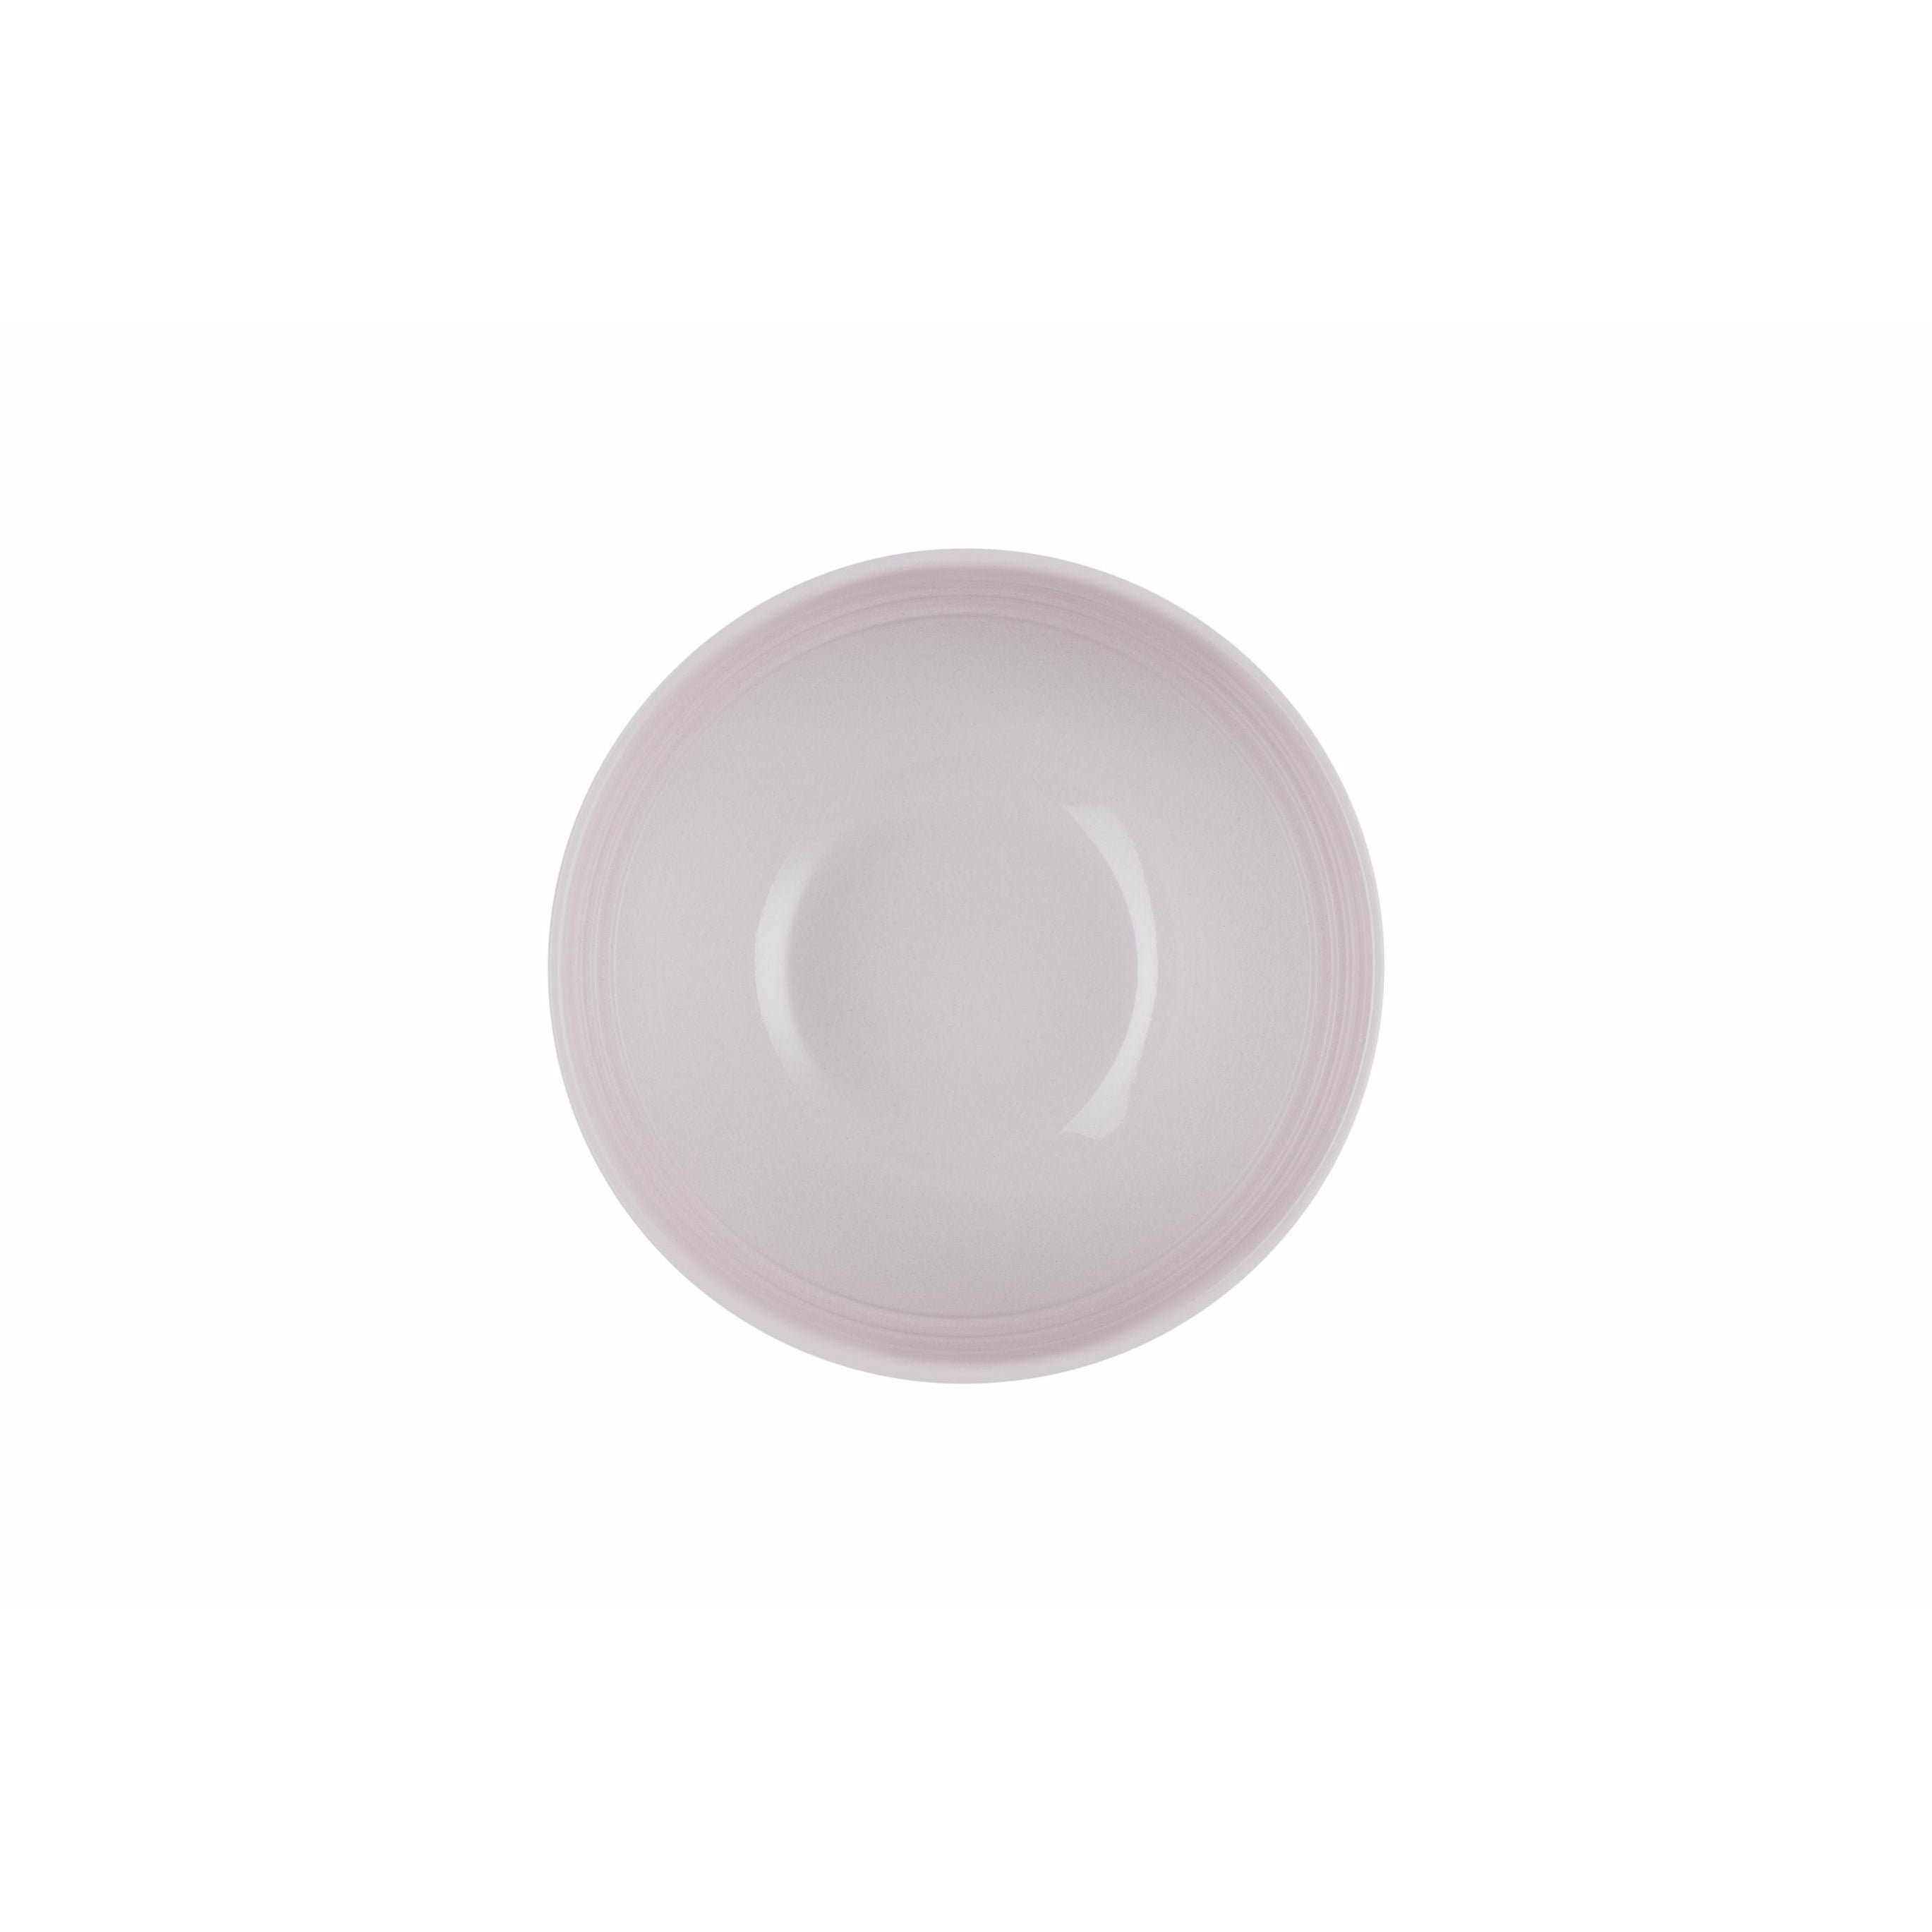 Le Creuset Signature Snack Bowl 12 cm, Shell Pink